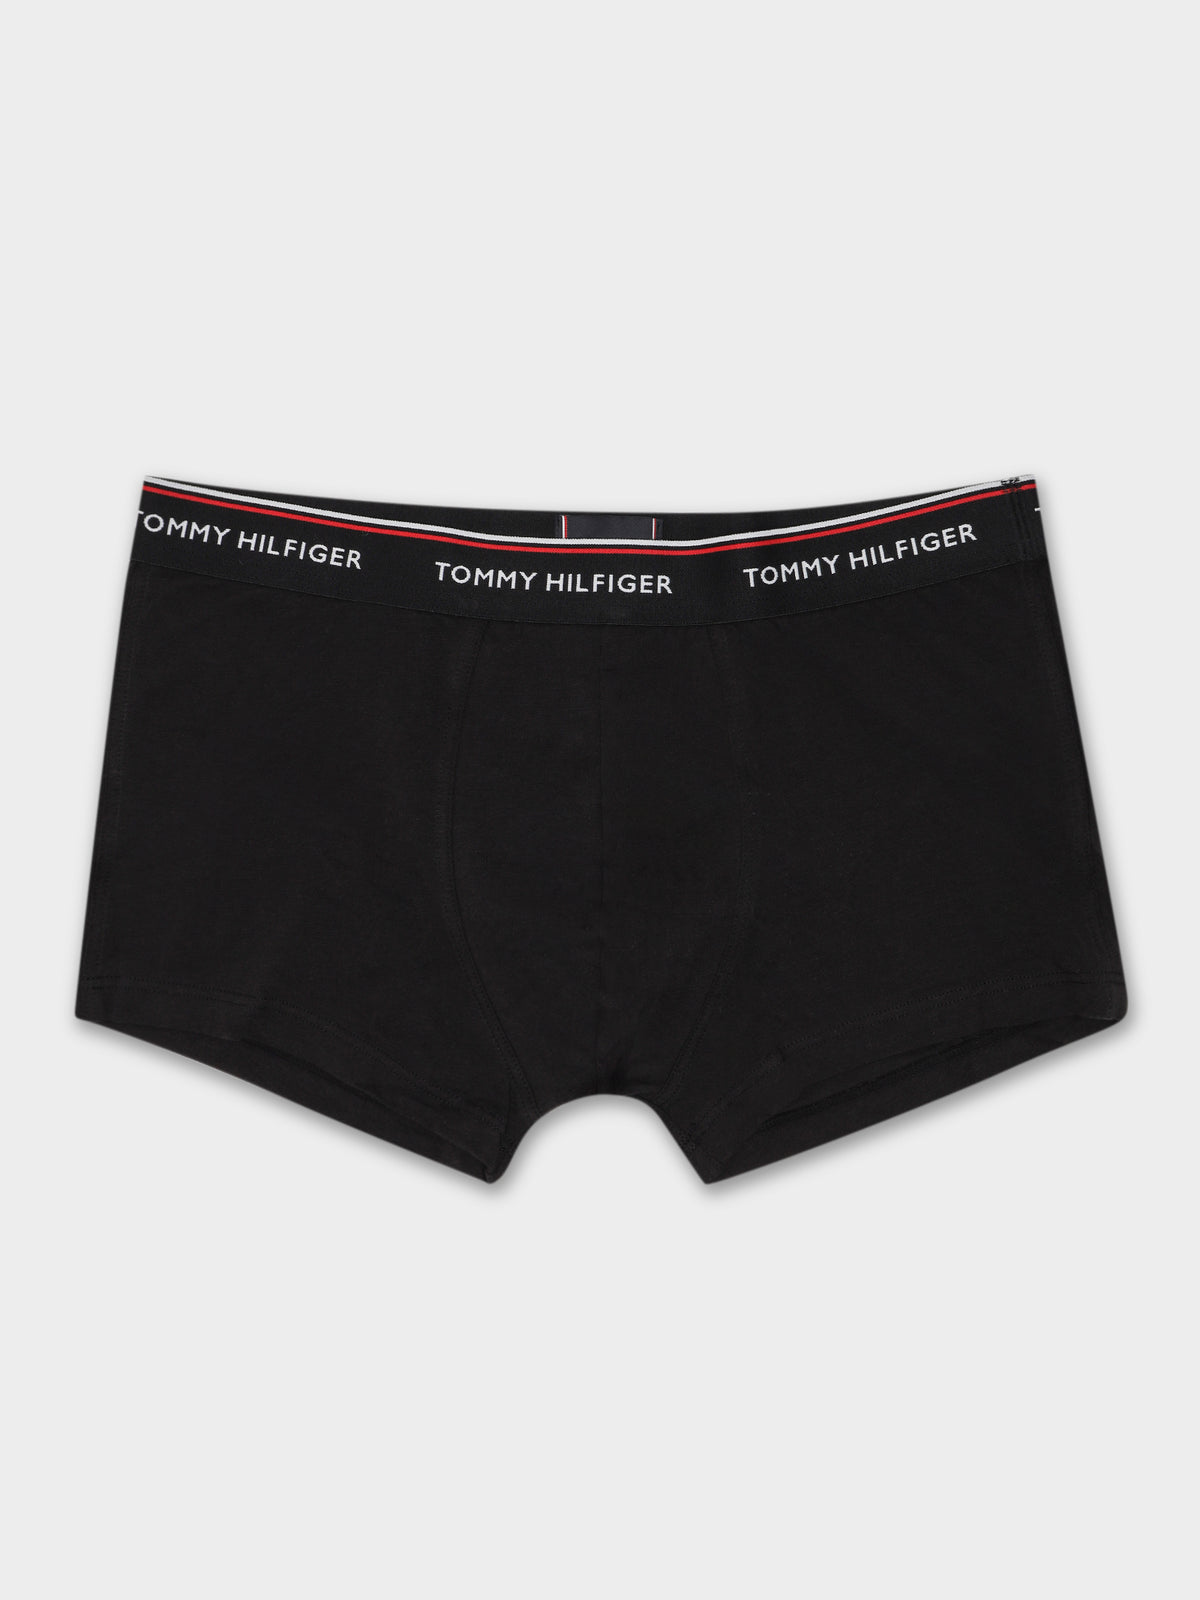 3 Pairs of Low Rise Boxer Briefs in Black